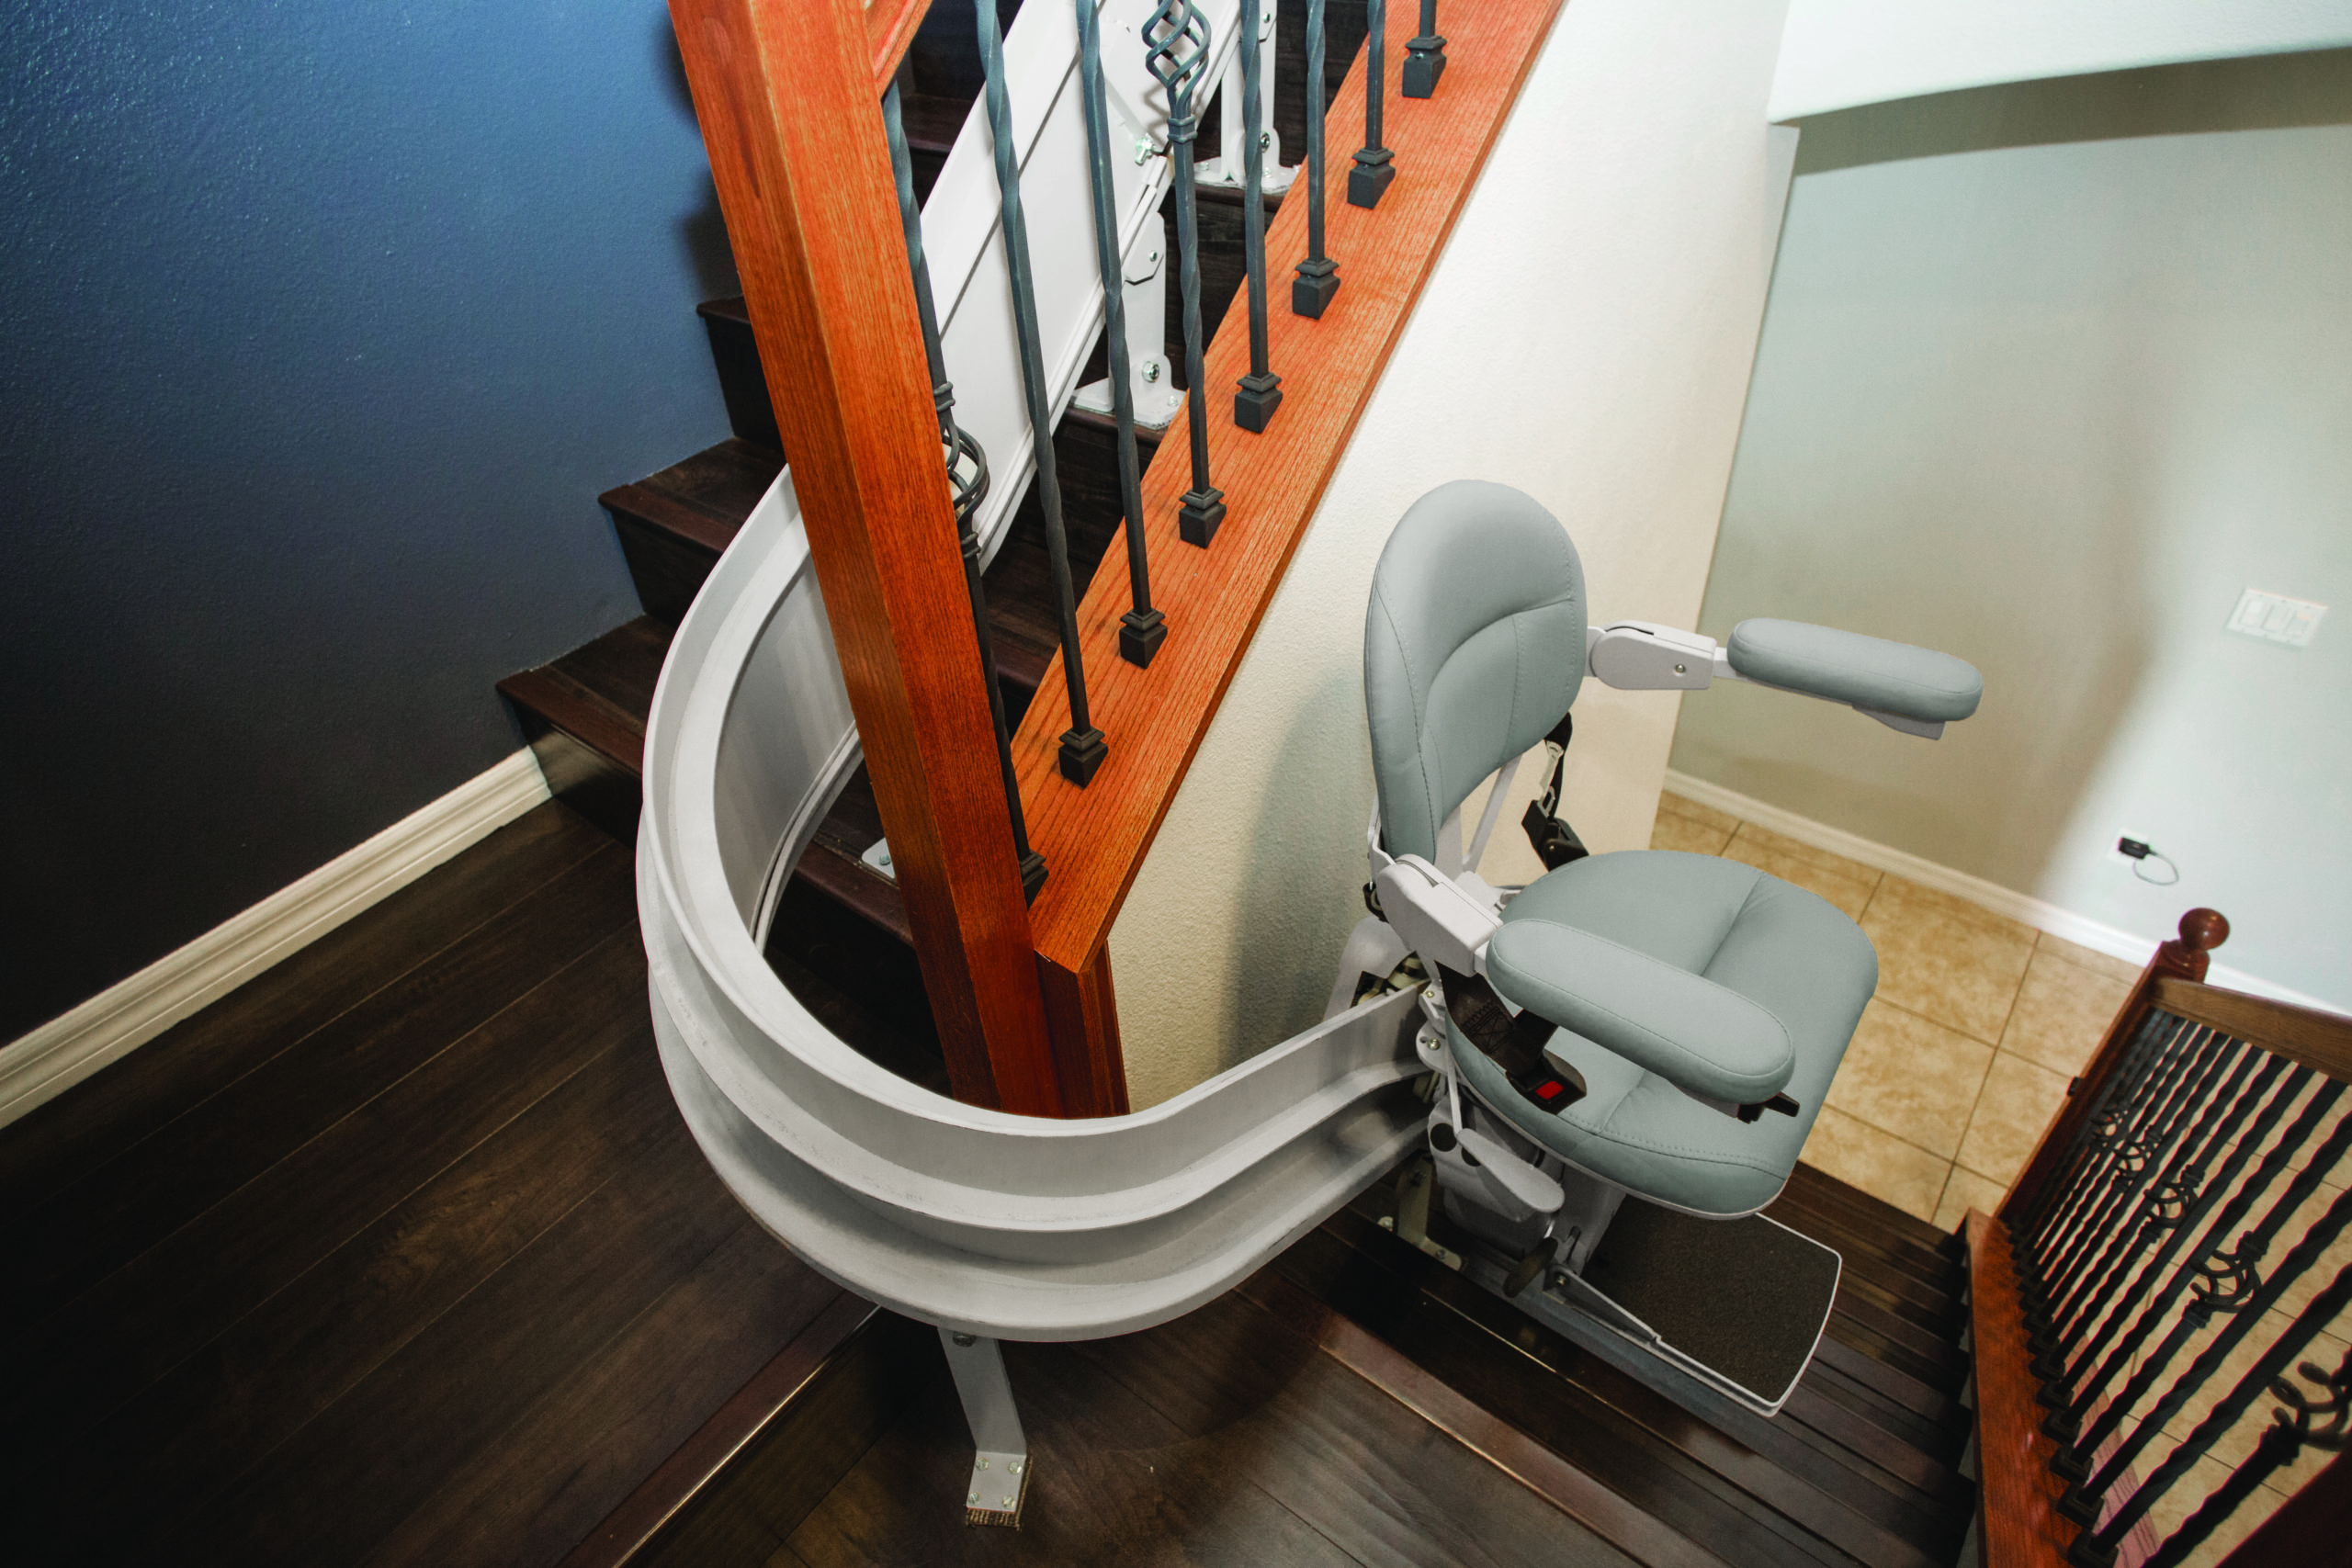 Home Medical Curved Stair Lifts on staircase | Mission Health + Home in Rochester, NY